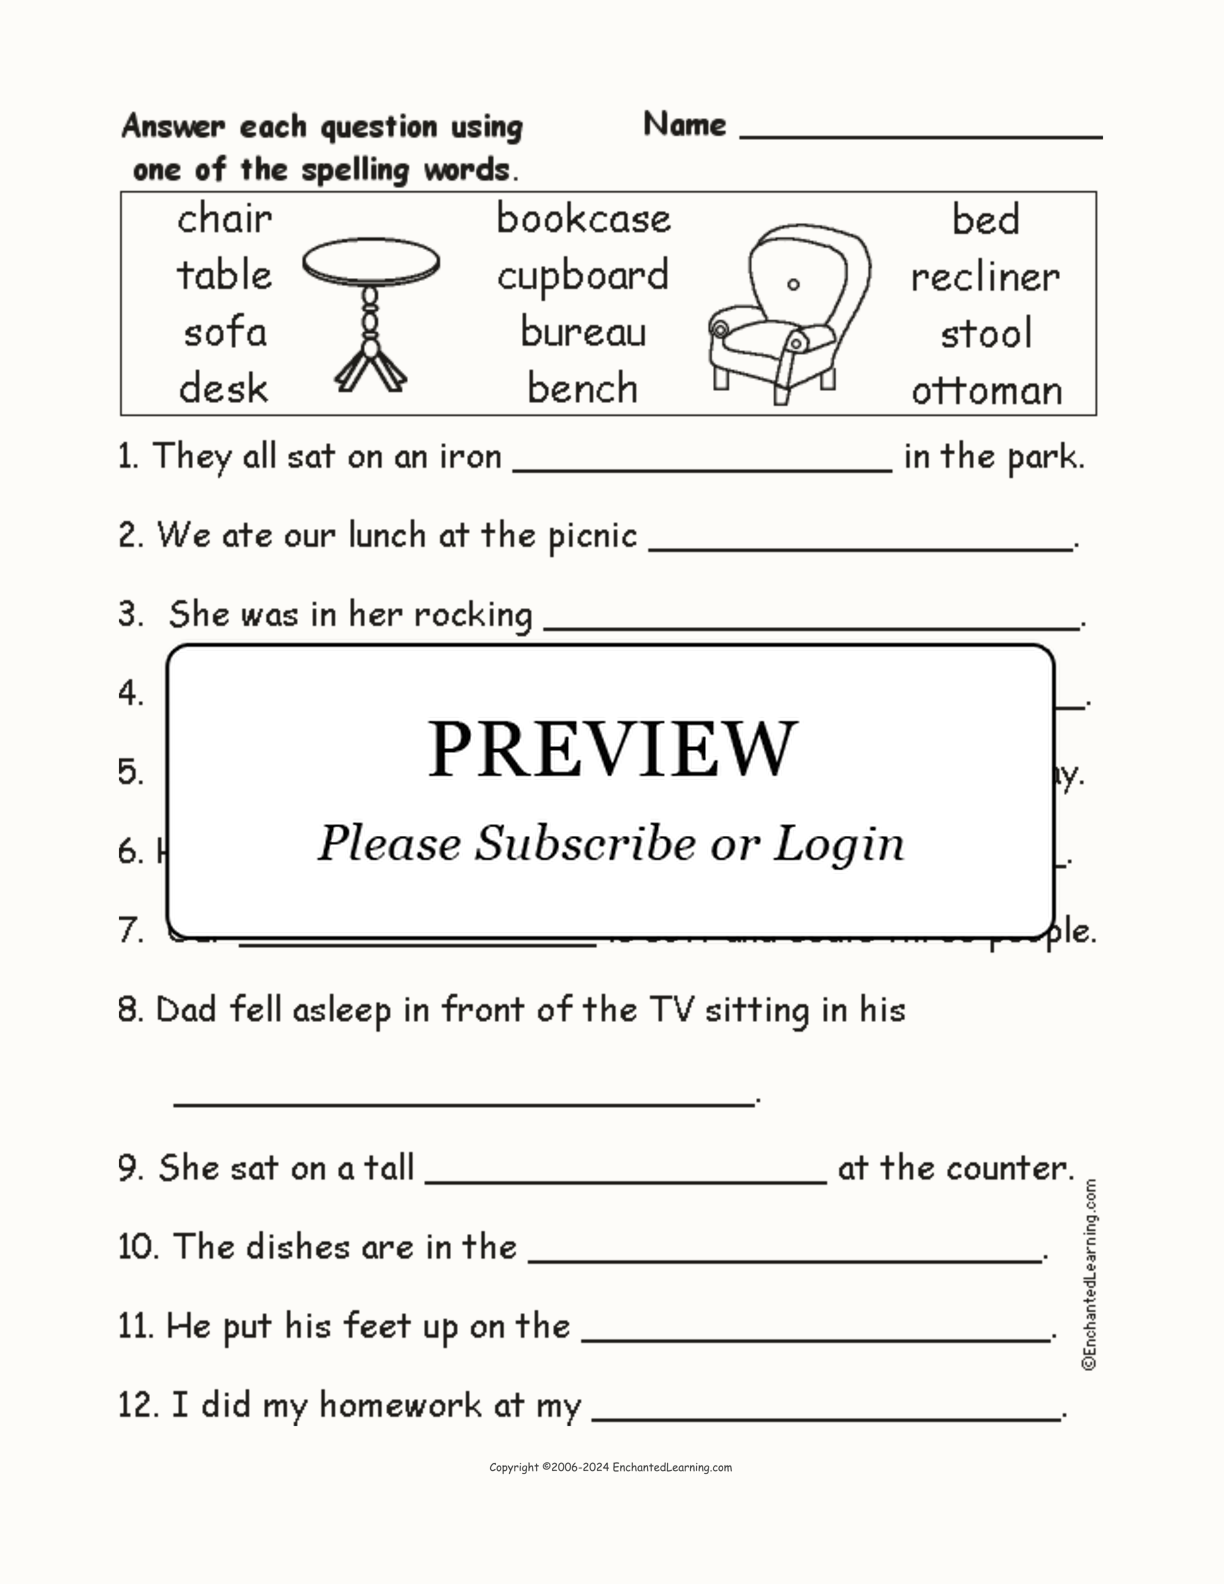 Furniture Spelling Word Questions interactive worksheet page 1